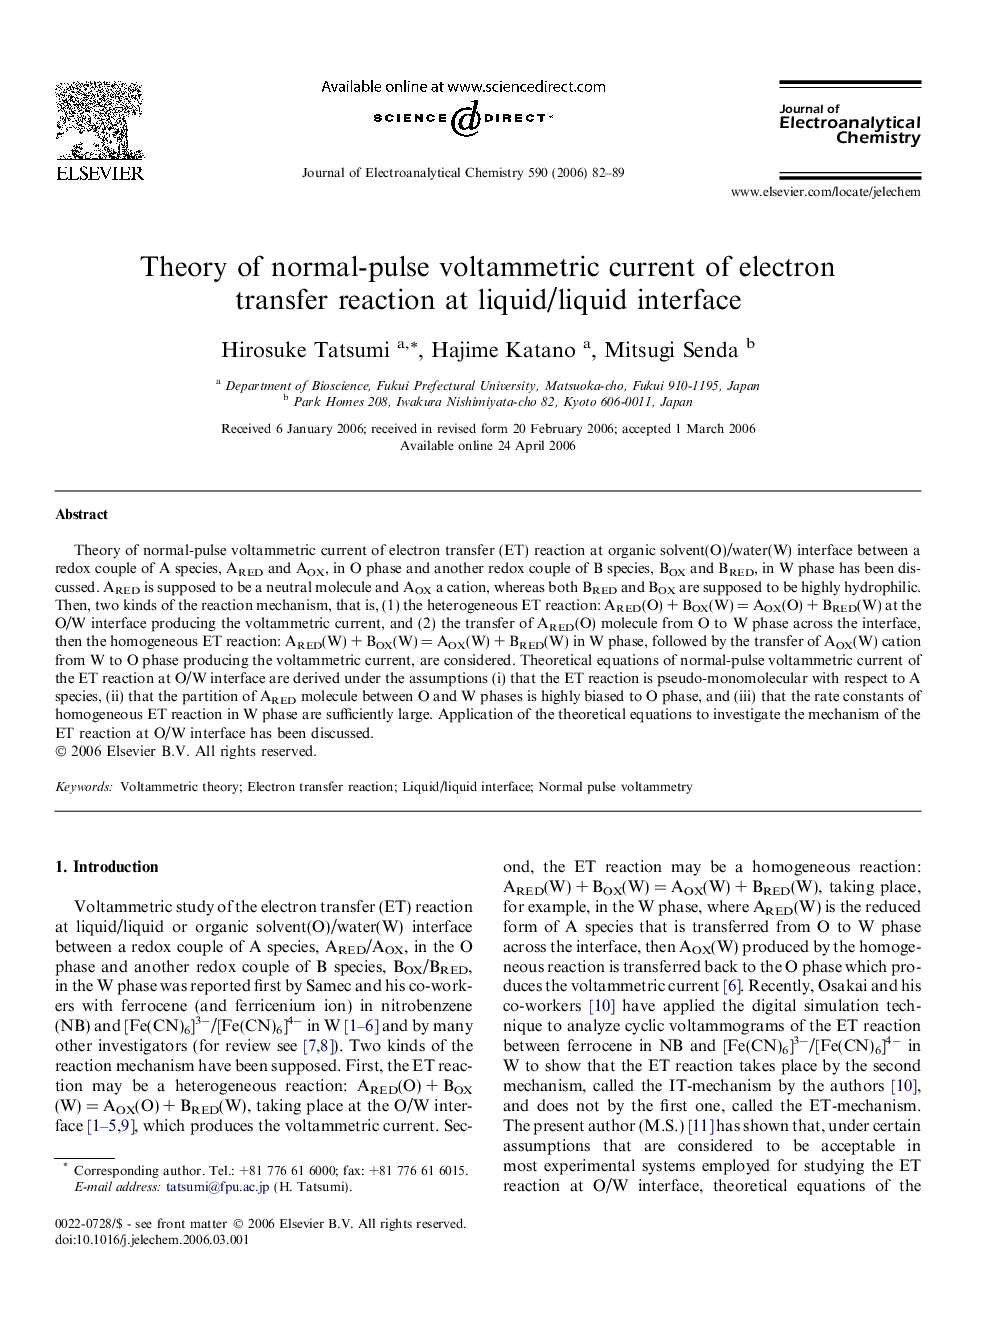 Theory of normal-pulse voltammetric current of electron transfer reaction at liquid/liquid interface